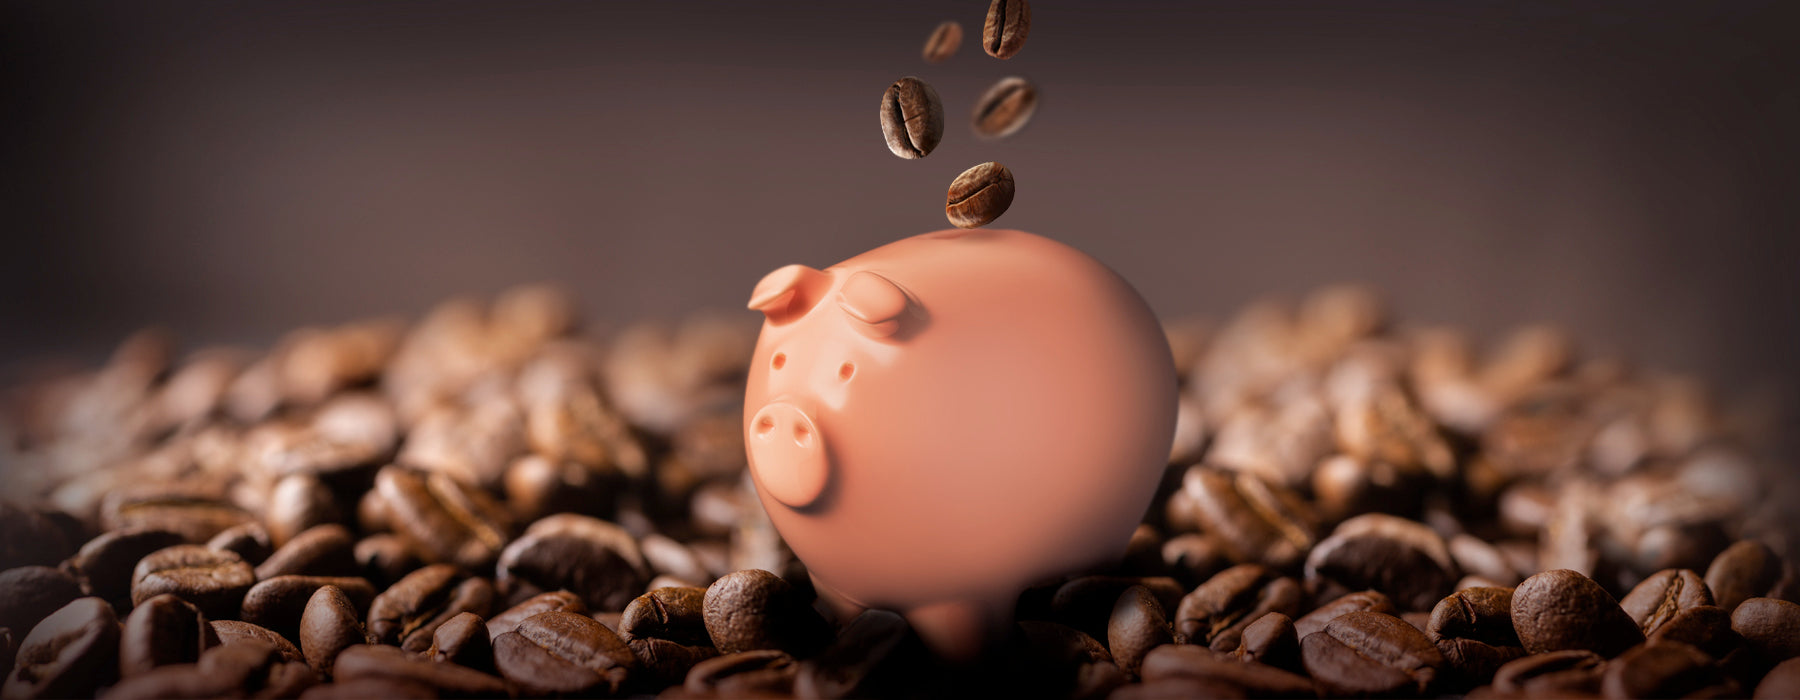 EspressoWorks - How much money can you save by making coffee at home? - Coffee Life Blog